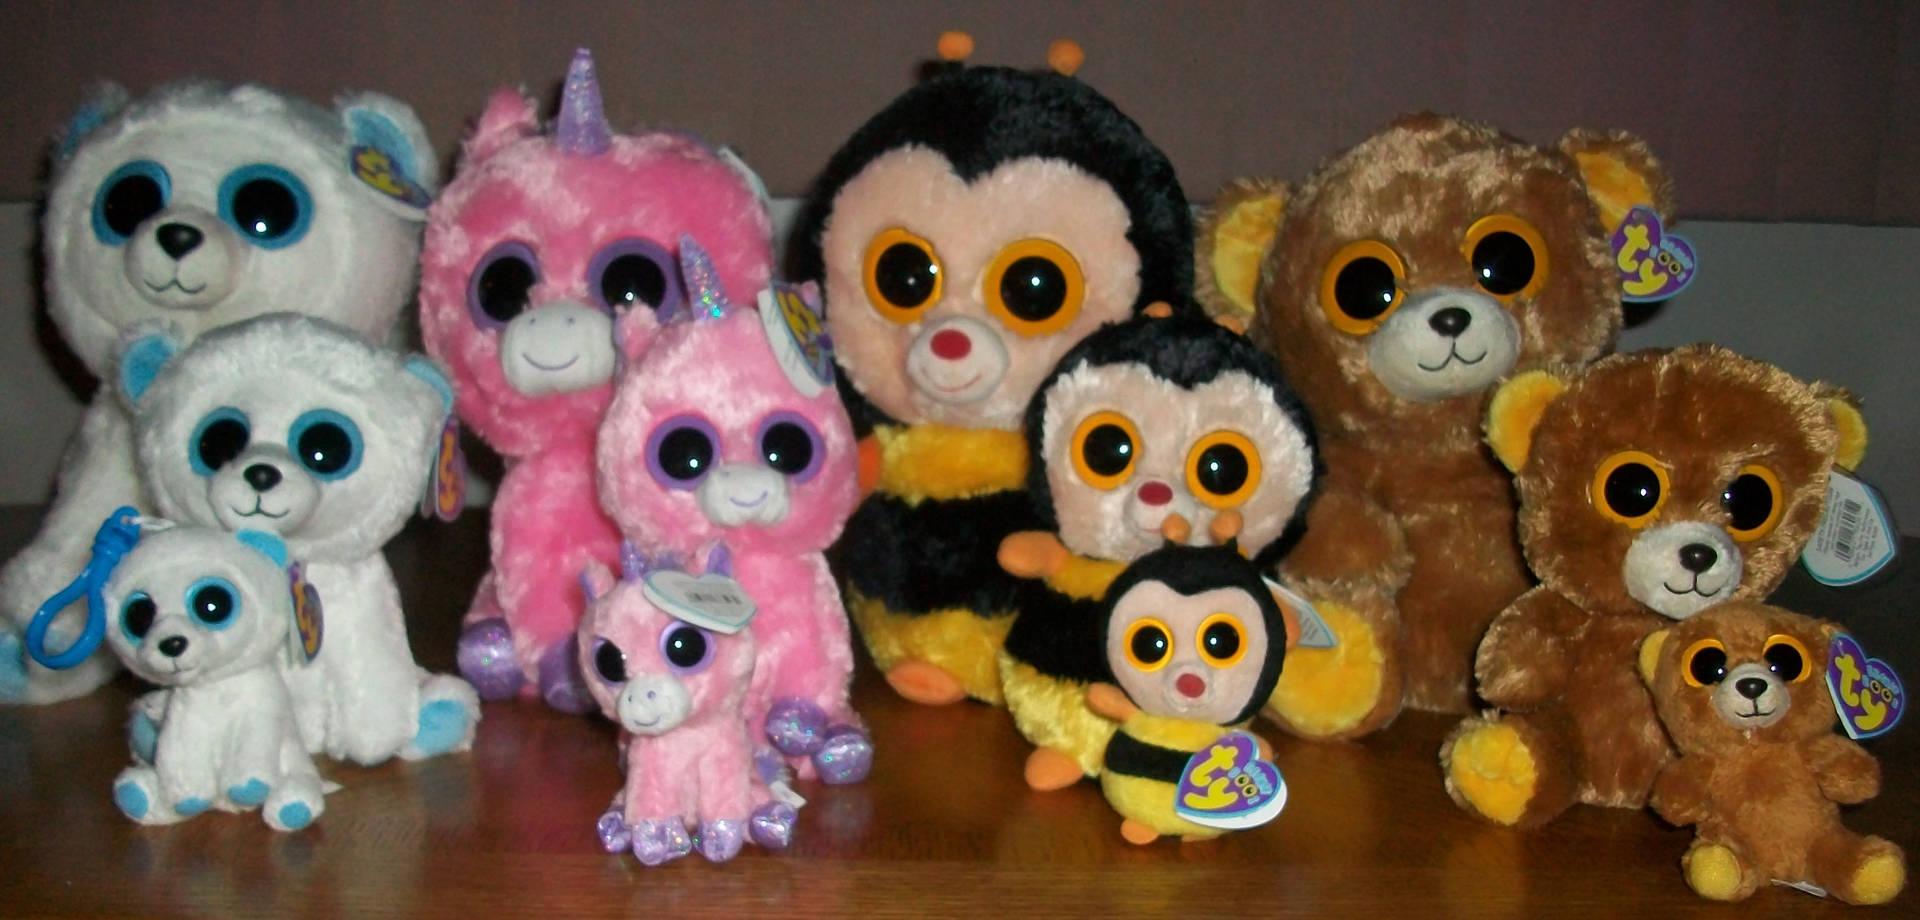 An Adorable Collection Of Beanie Boos Plushies